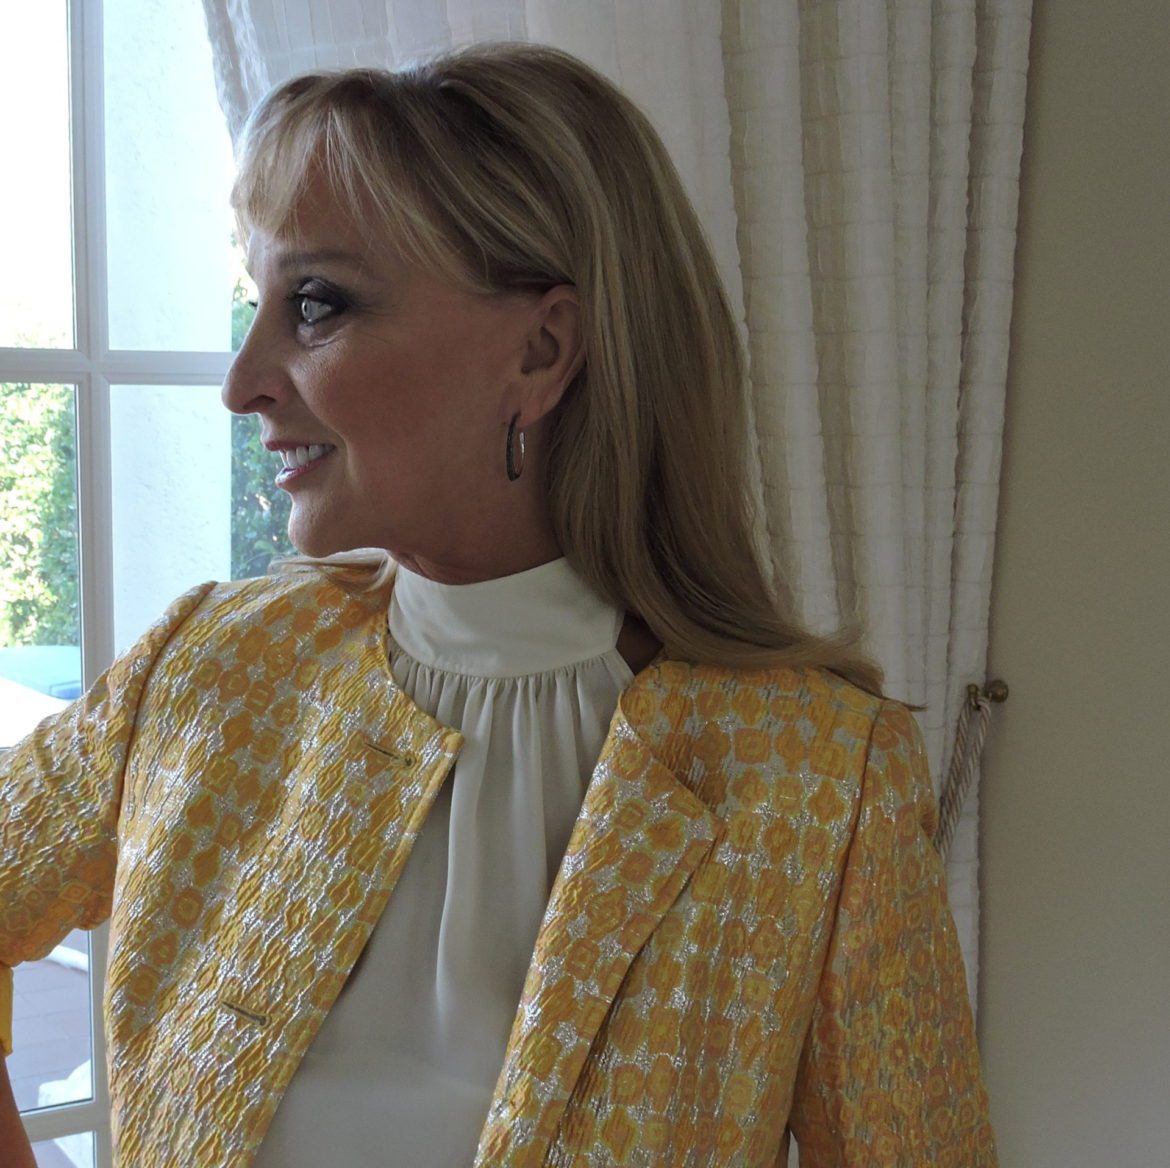 A woman in yellow jacket and white blouse.